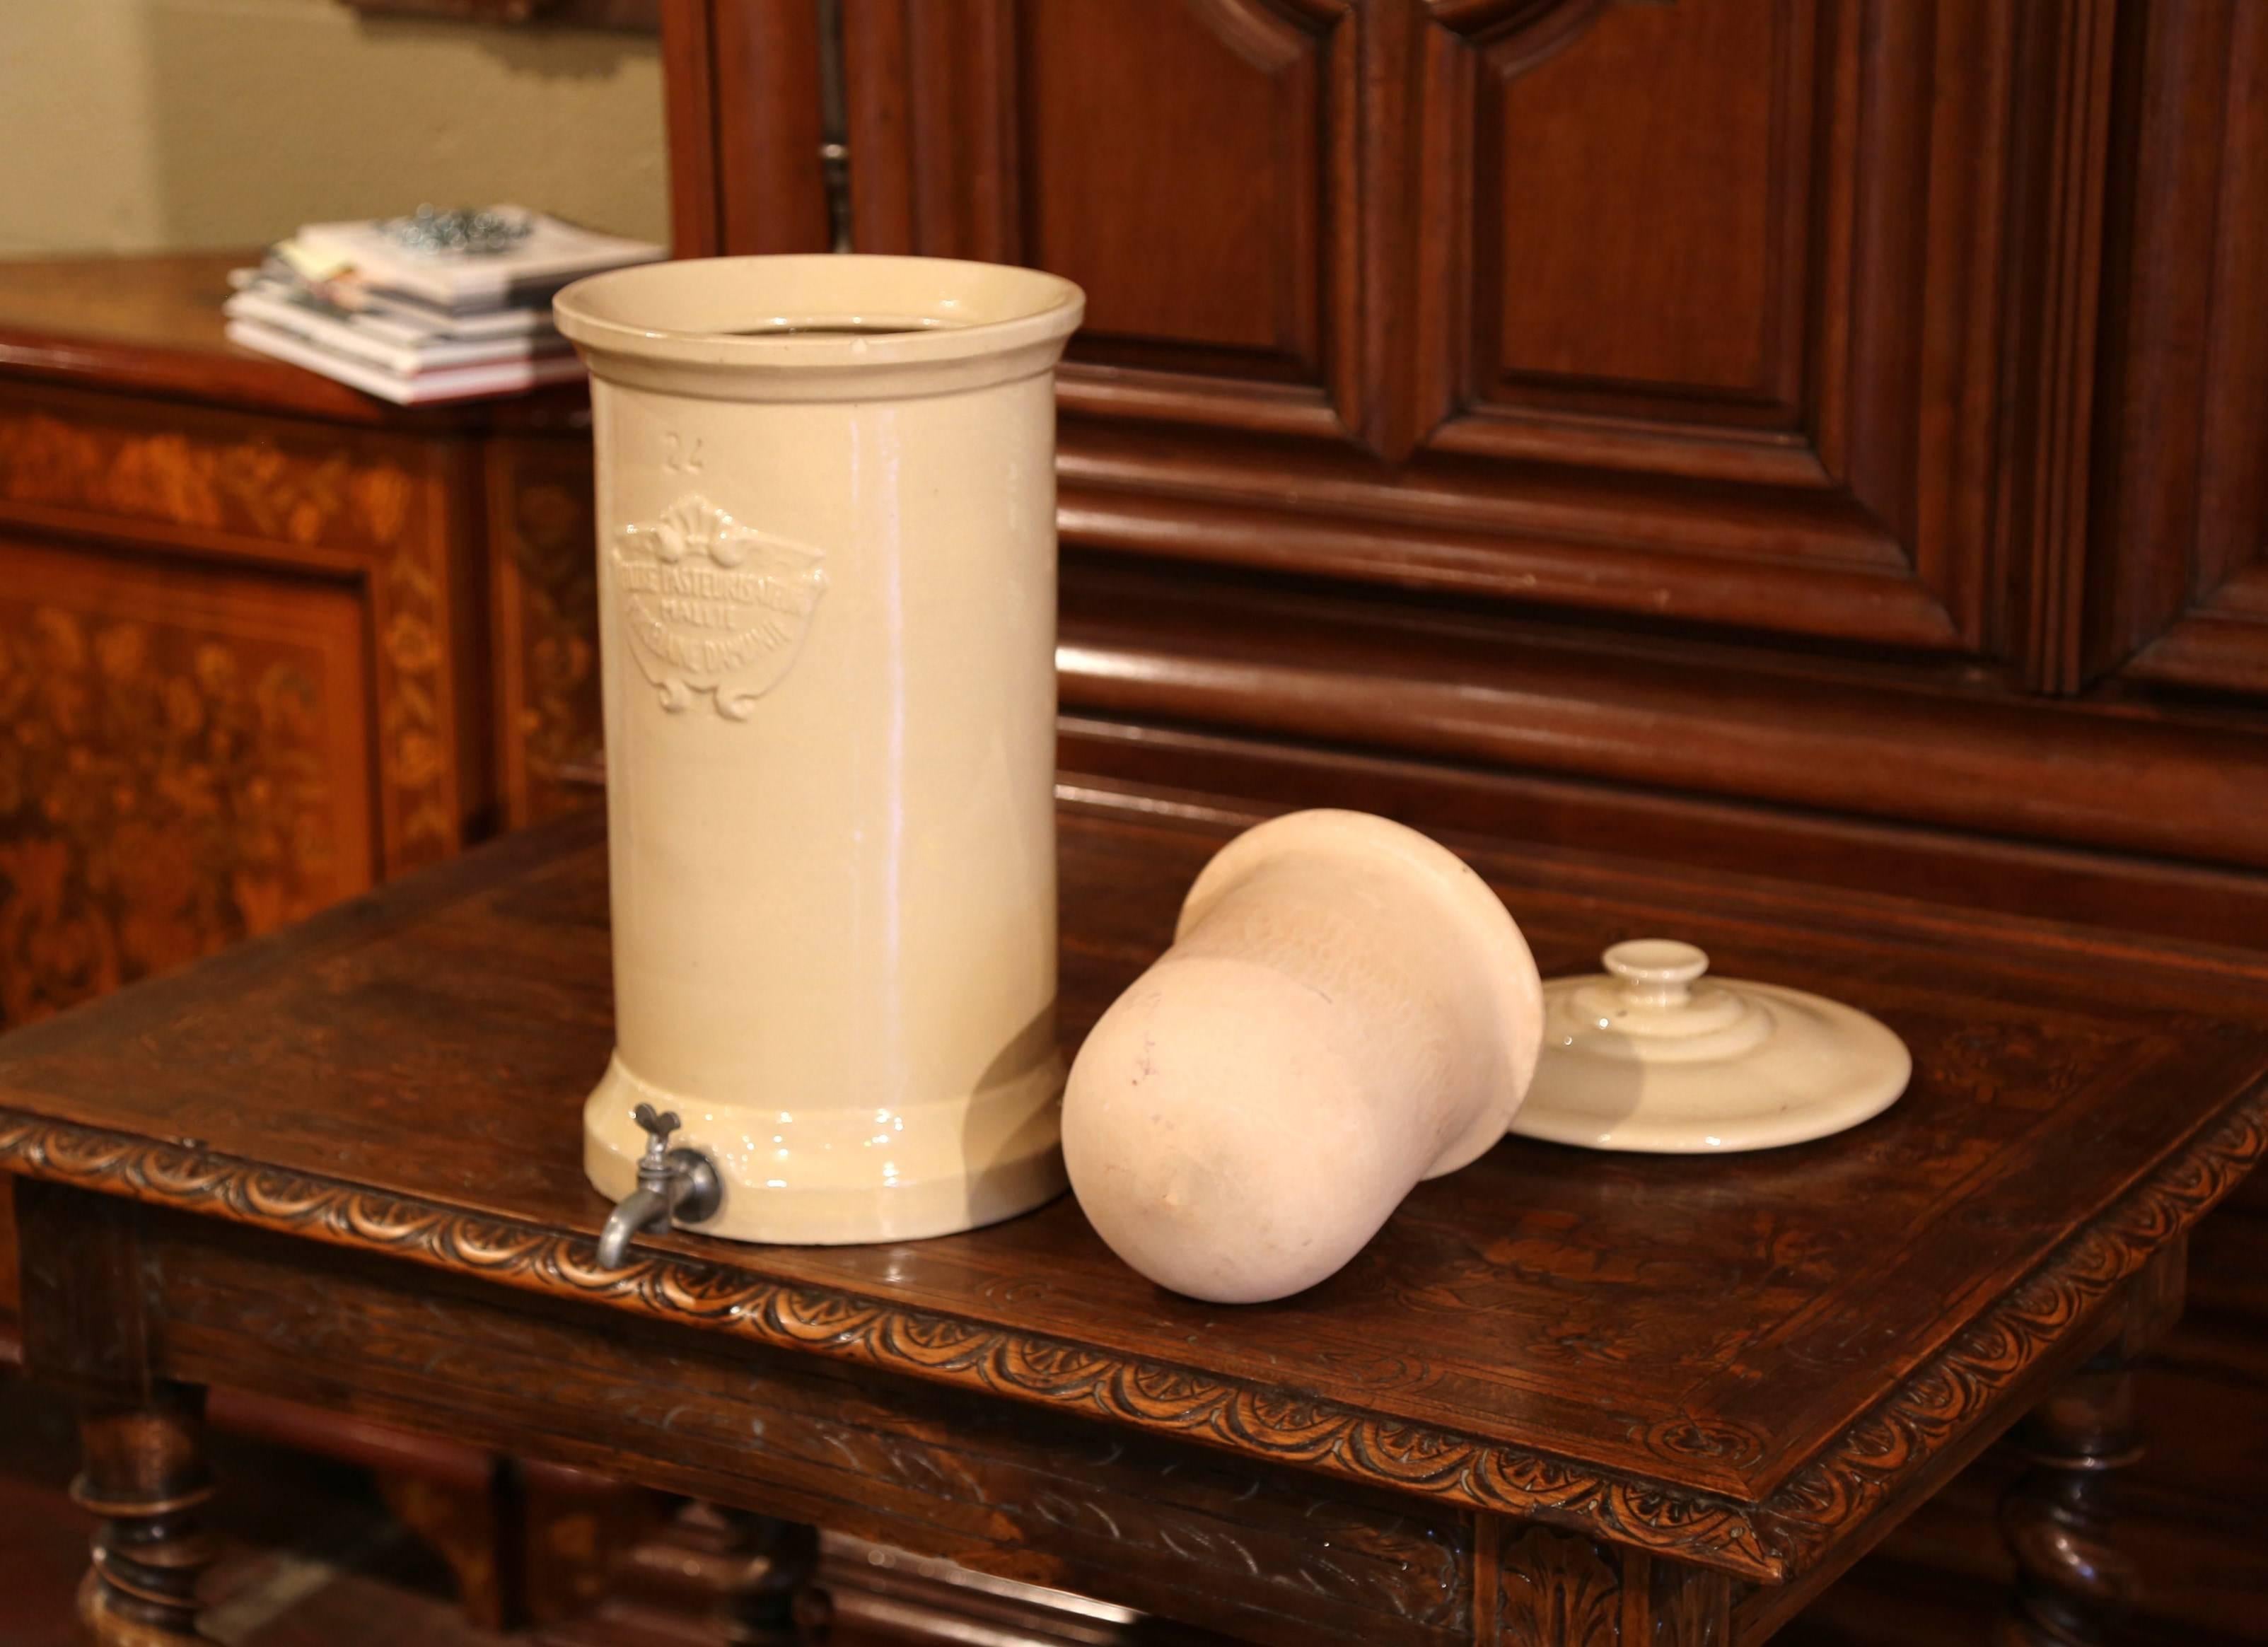 19th Century French Glazed Porcelain Water Filter Pharmacy Display Item In Excellent Condition For Sale In Dallas, TX